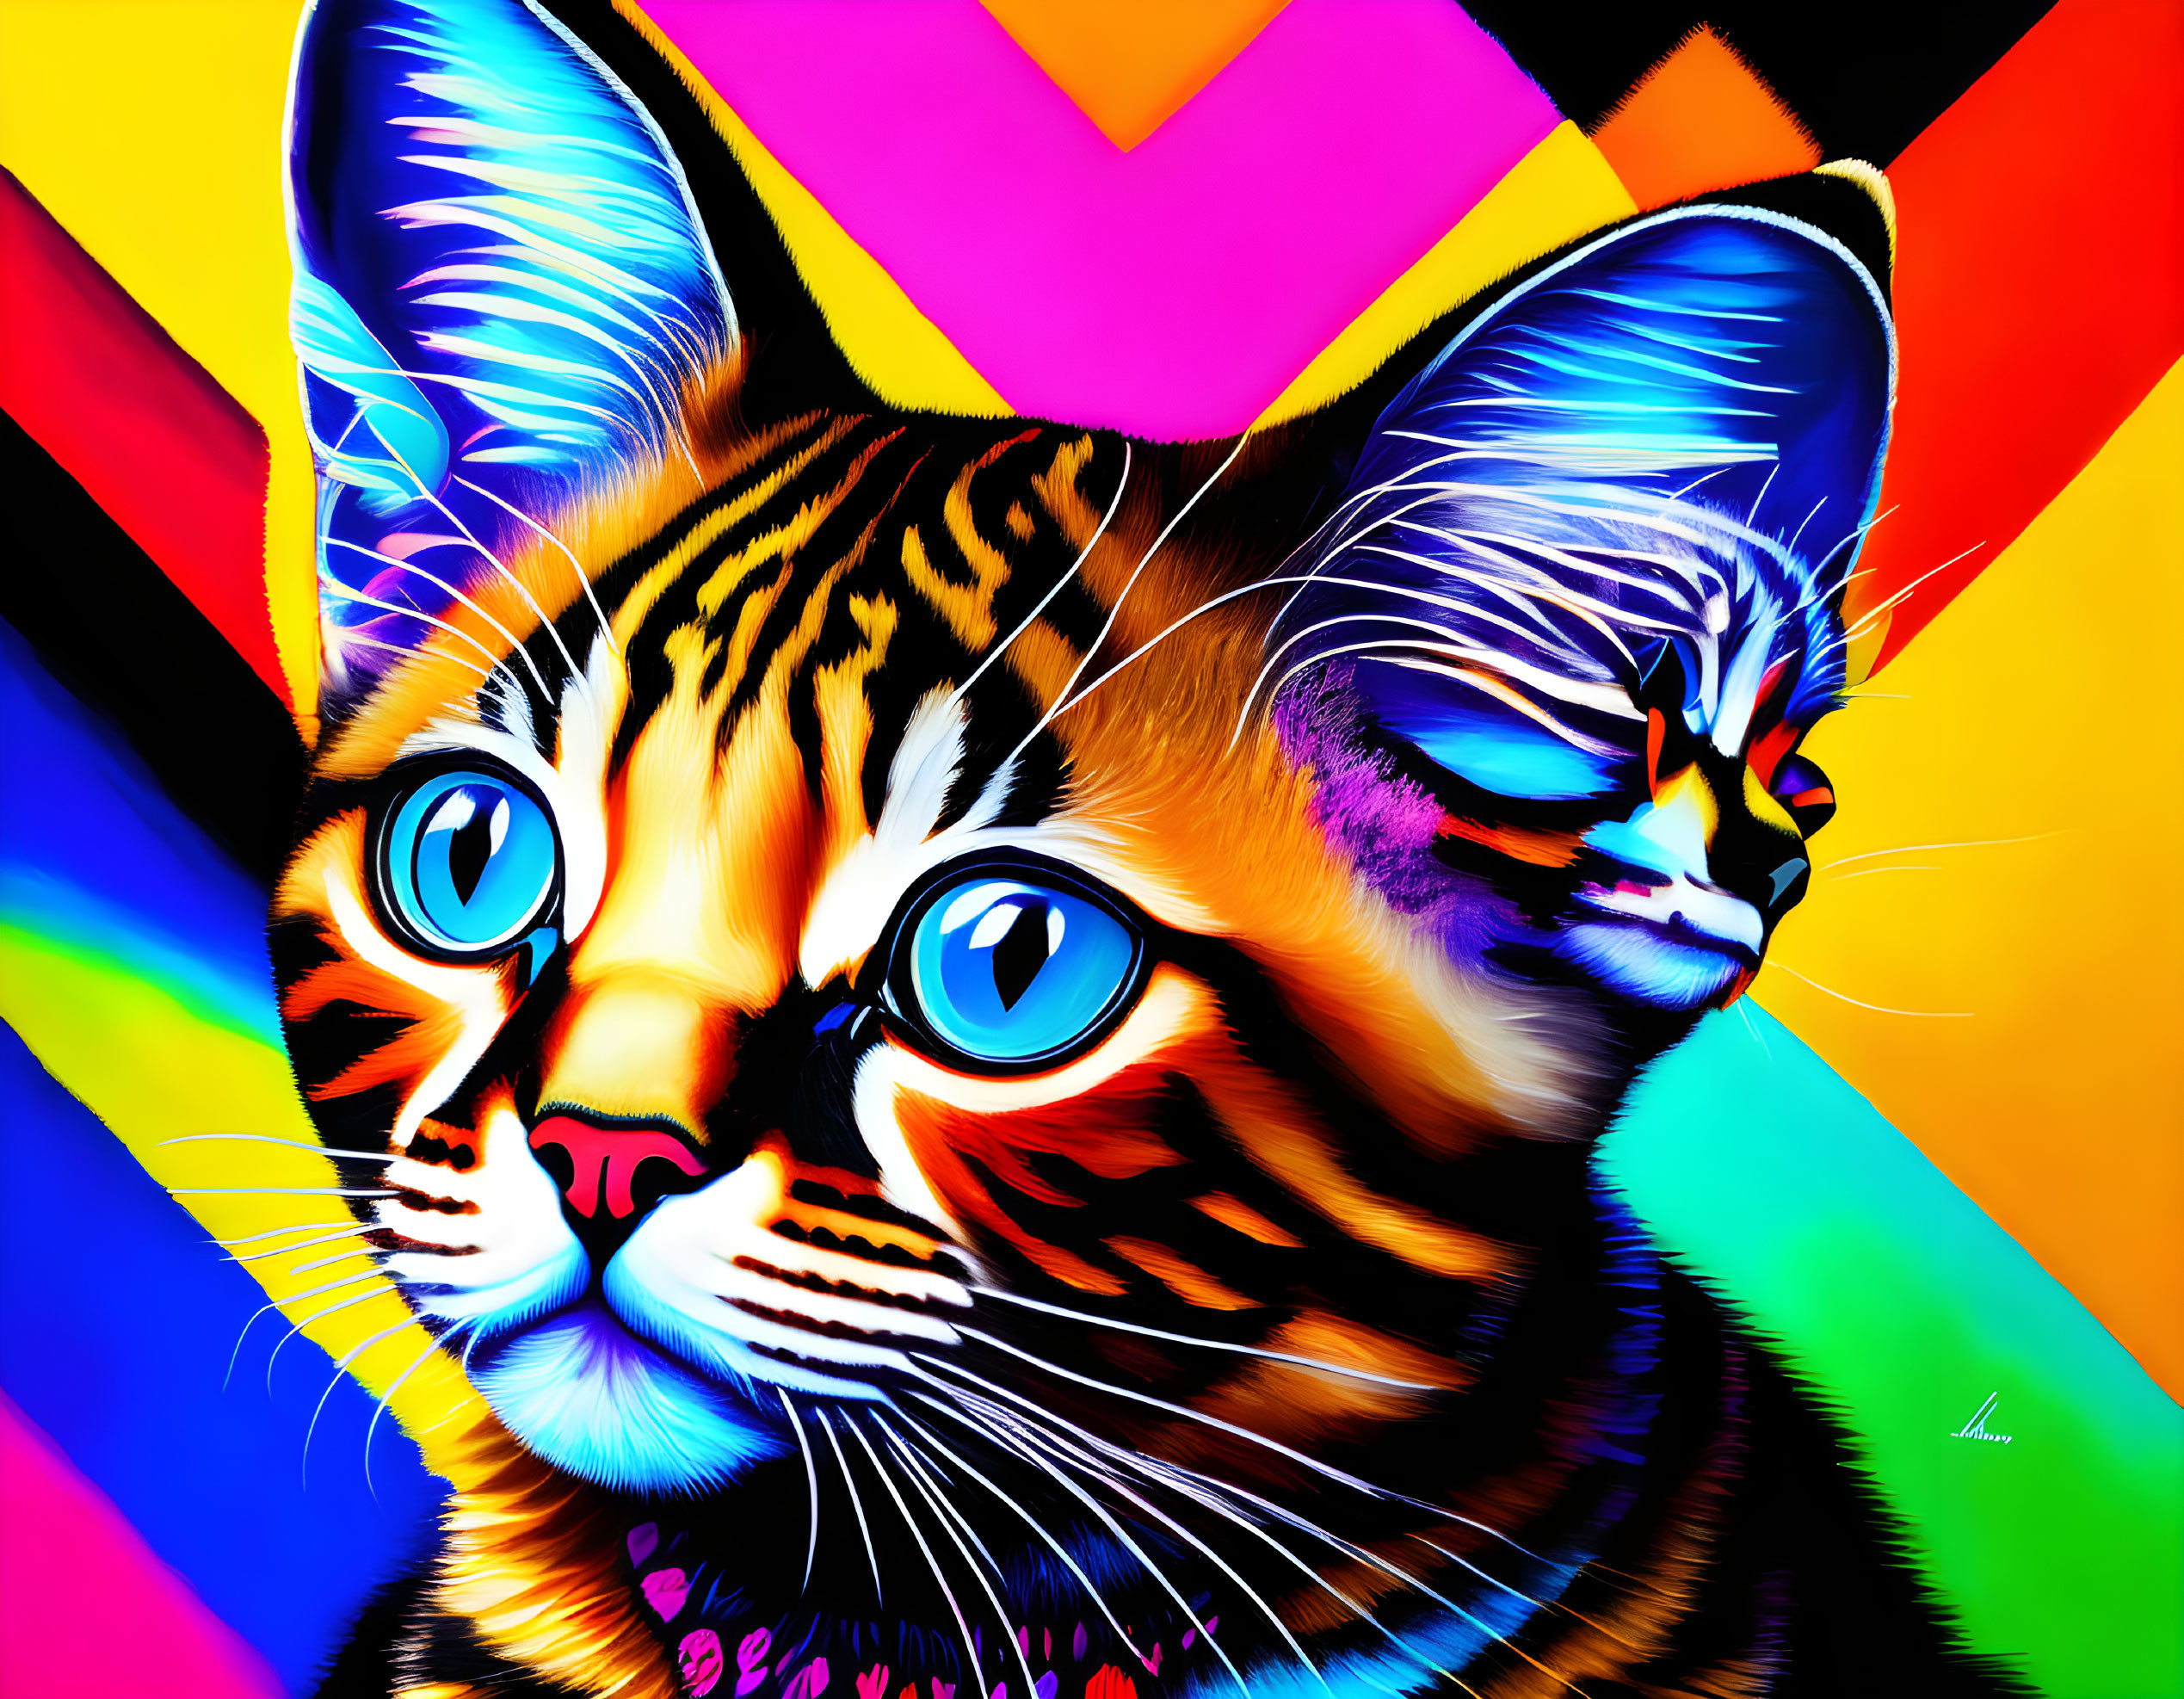 Colorful digital art featuring cat with striking blue eyes